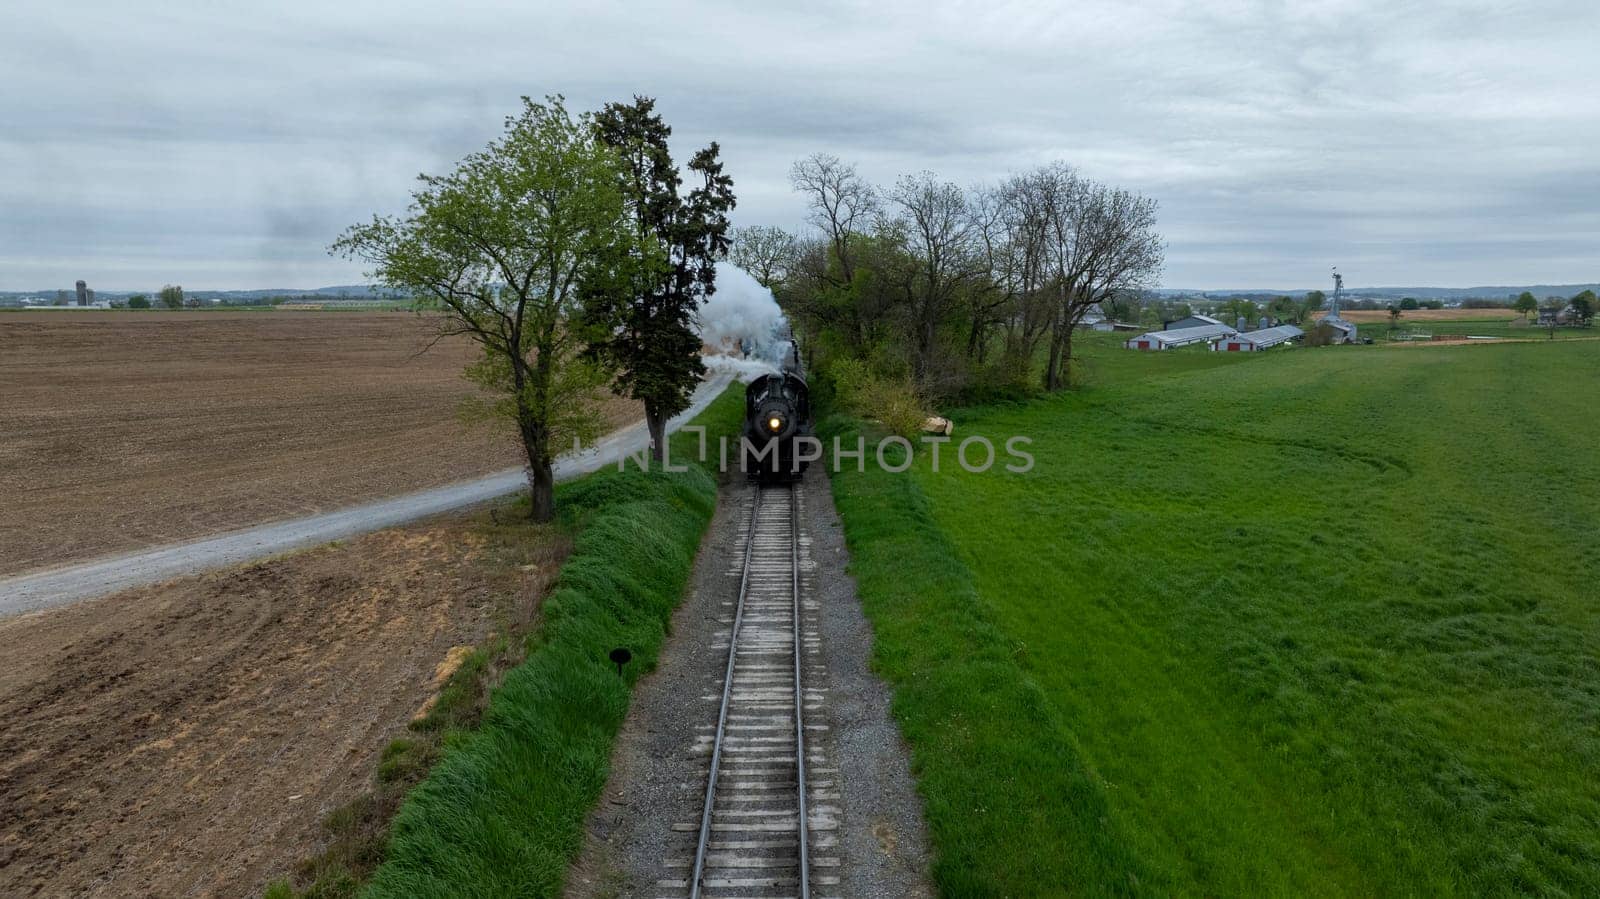 Train is traveling down track next to field. The train is black and steam is coming out of the front by actionphoto50